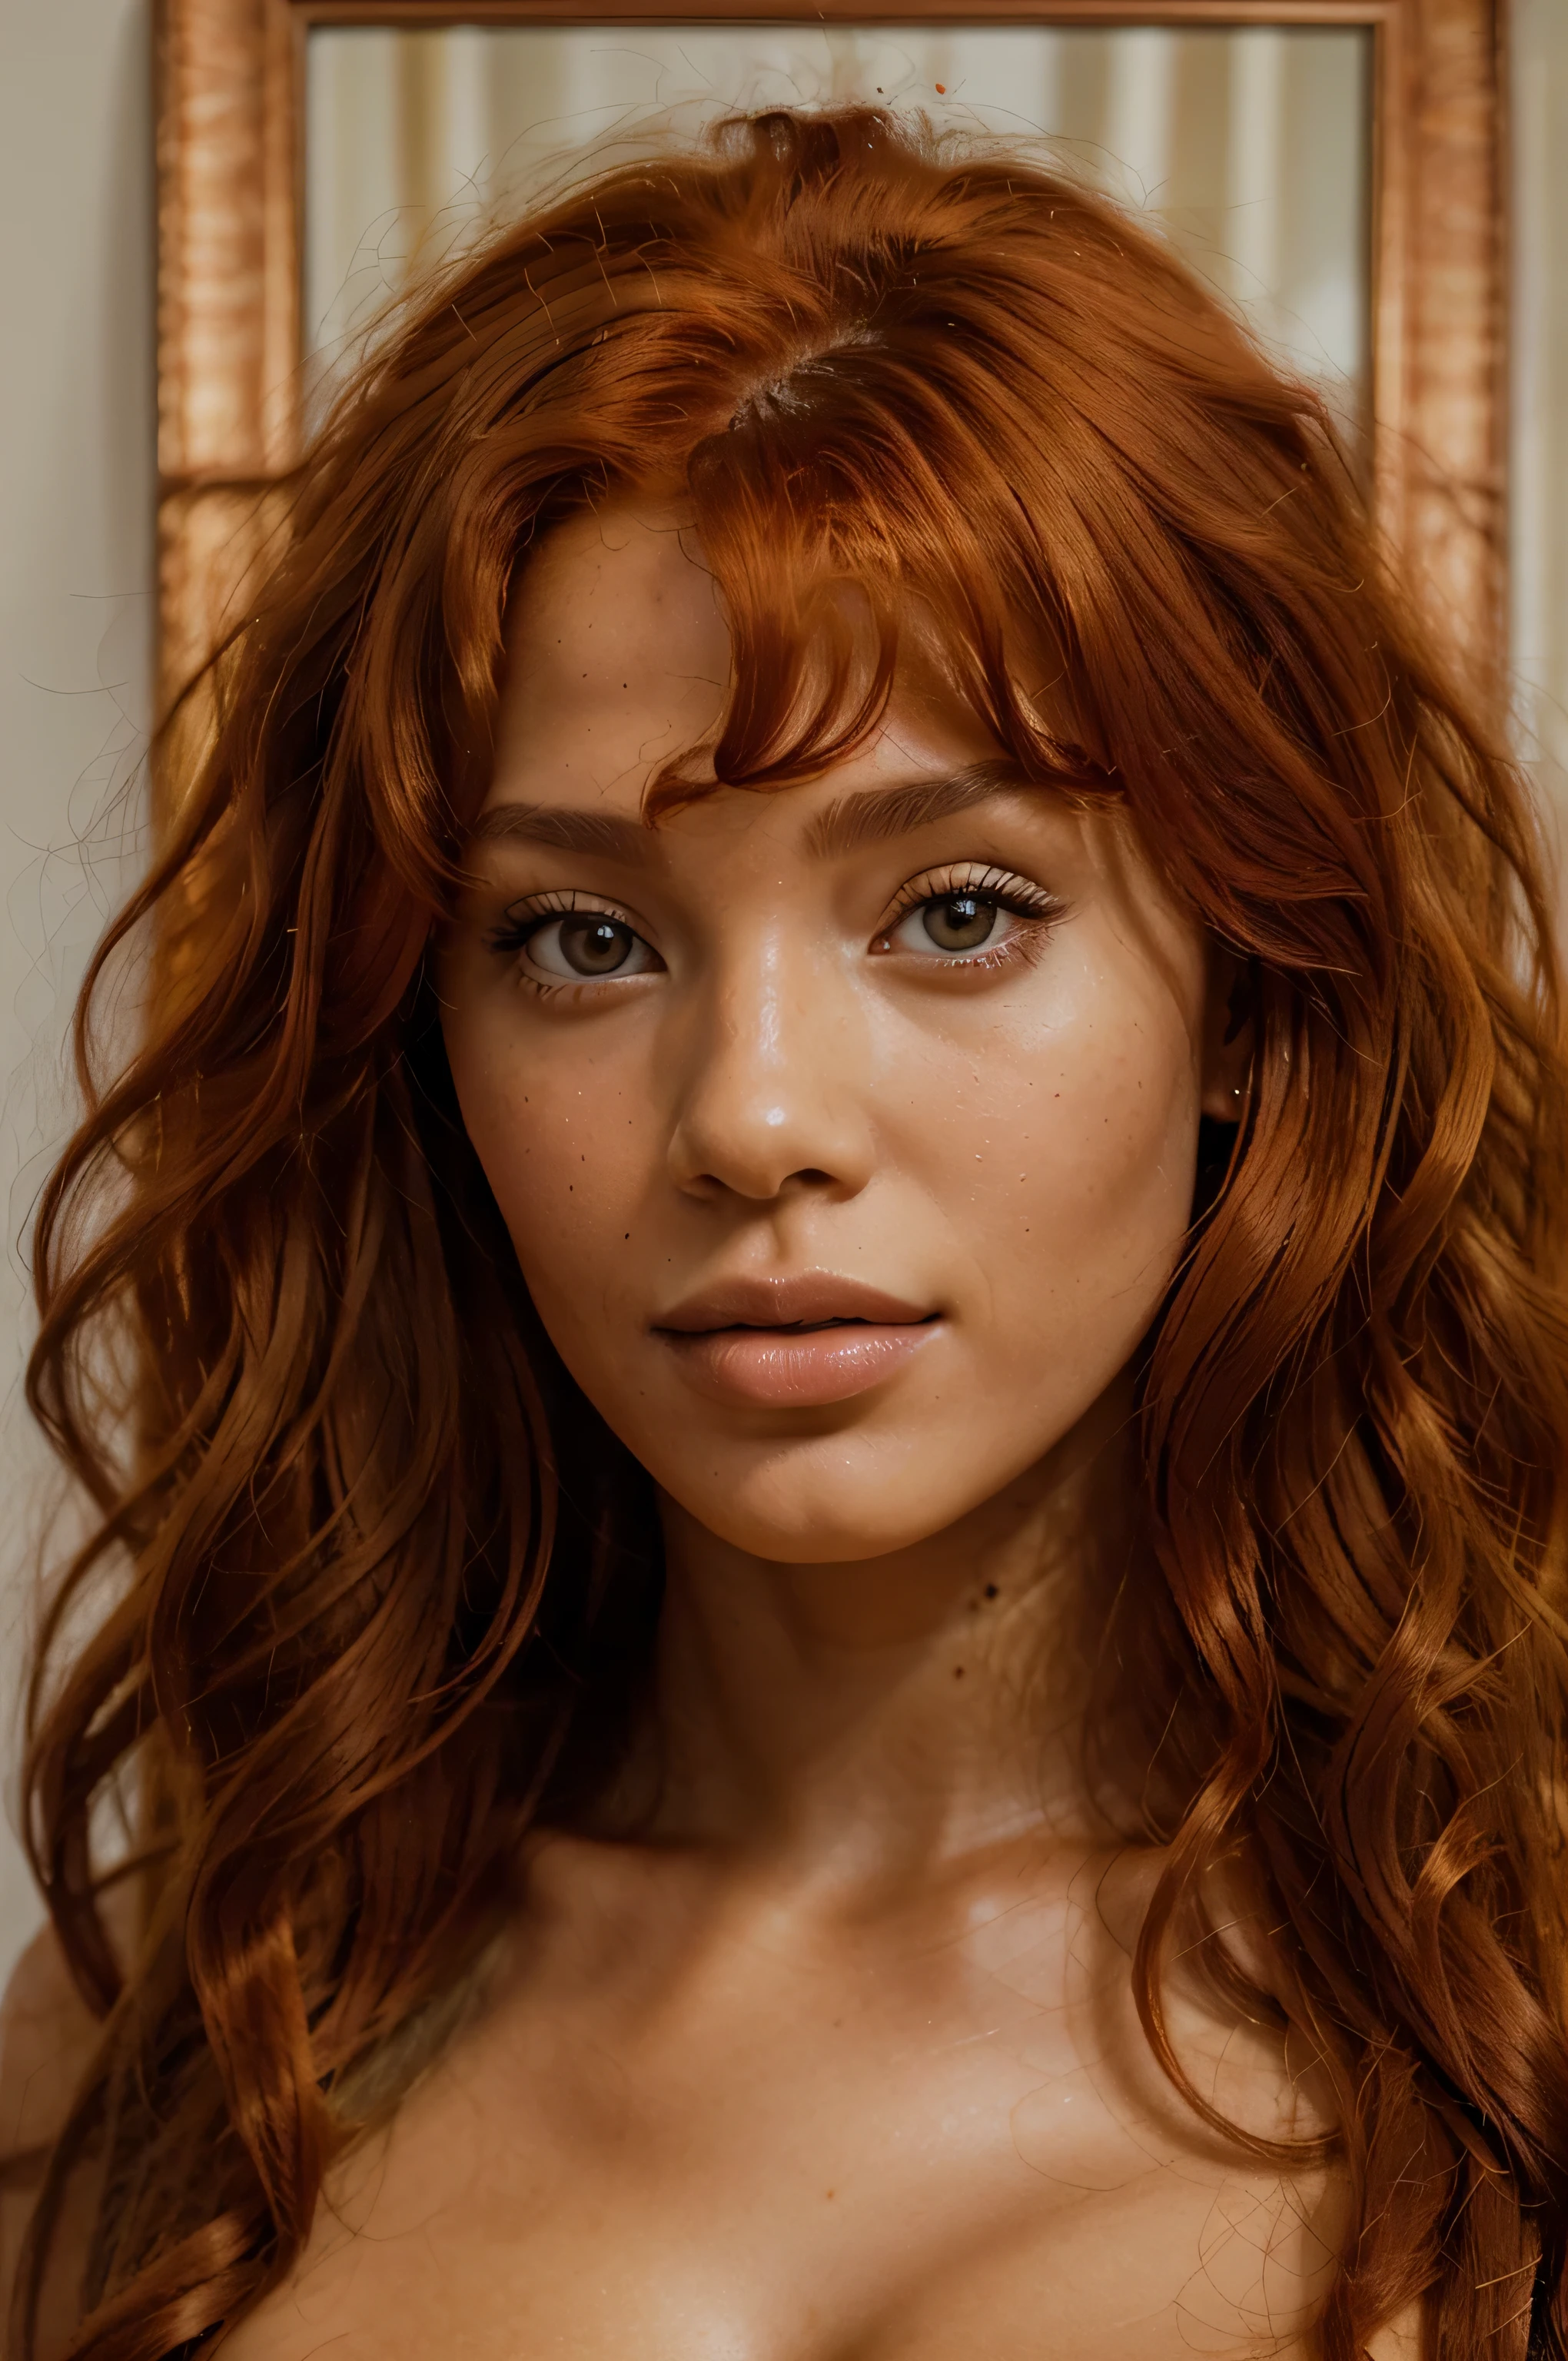 a close up of a woman with red hair posing for a picture, a portrait by Nicholas Marsicano, trending on cg society, digital art, curly copper colored hair, sza, stunning african princess, orange skin and long fiery hair, gorgeous beautiful woman, stunning beauty, photoshoot, gorgeous woman, wild ginger hair, jaw-dropping beauty, stunning woman